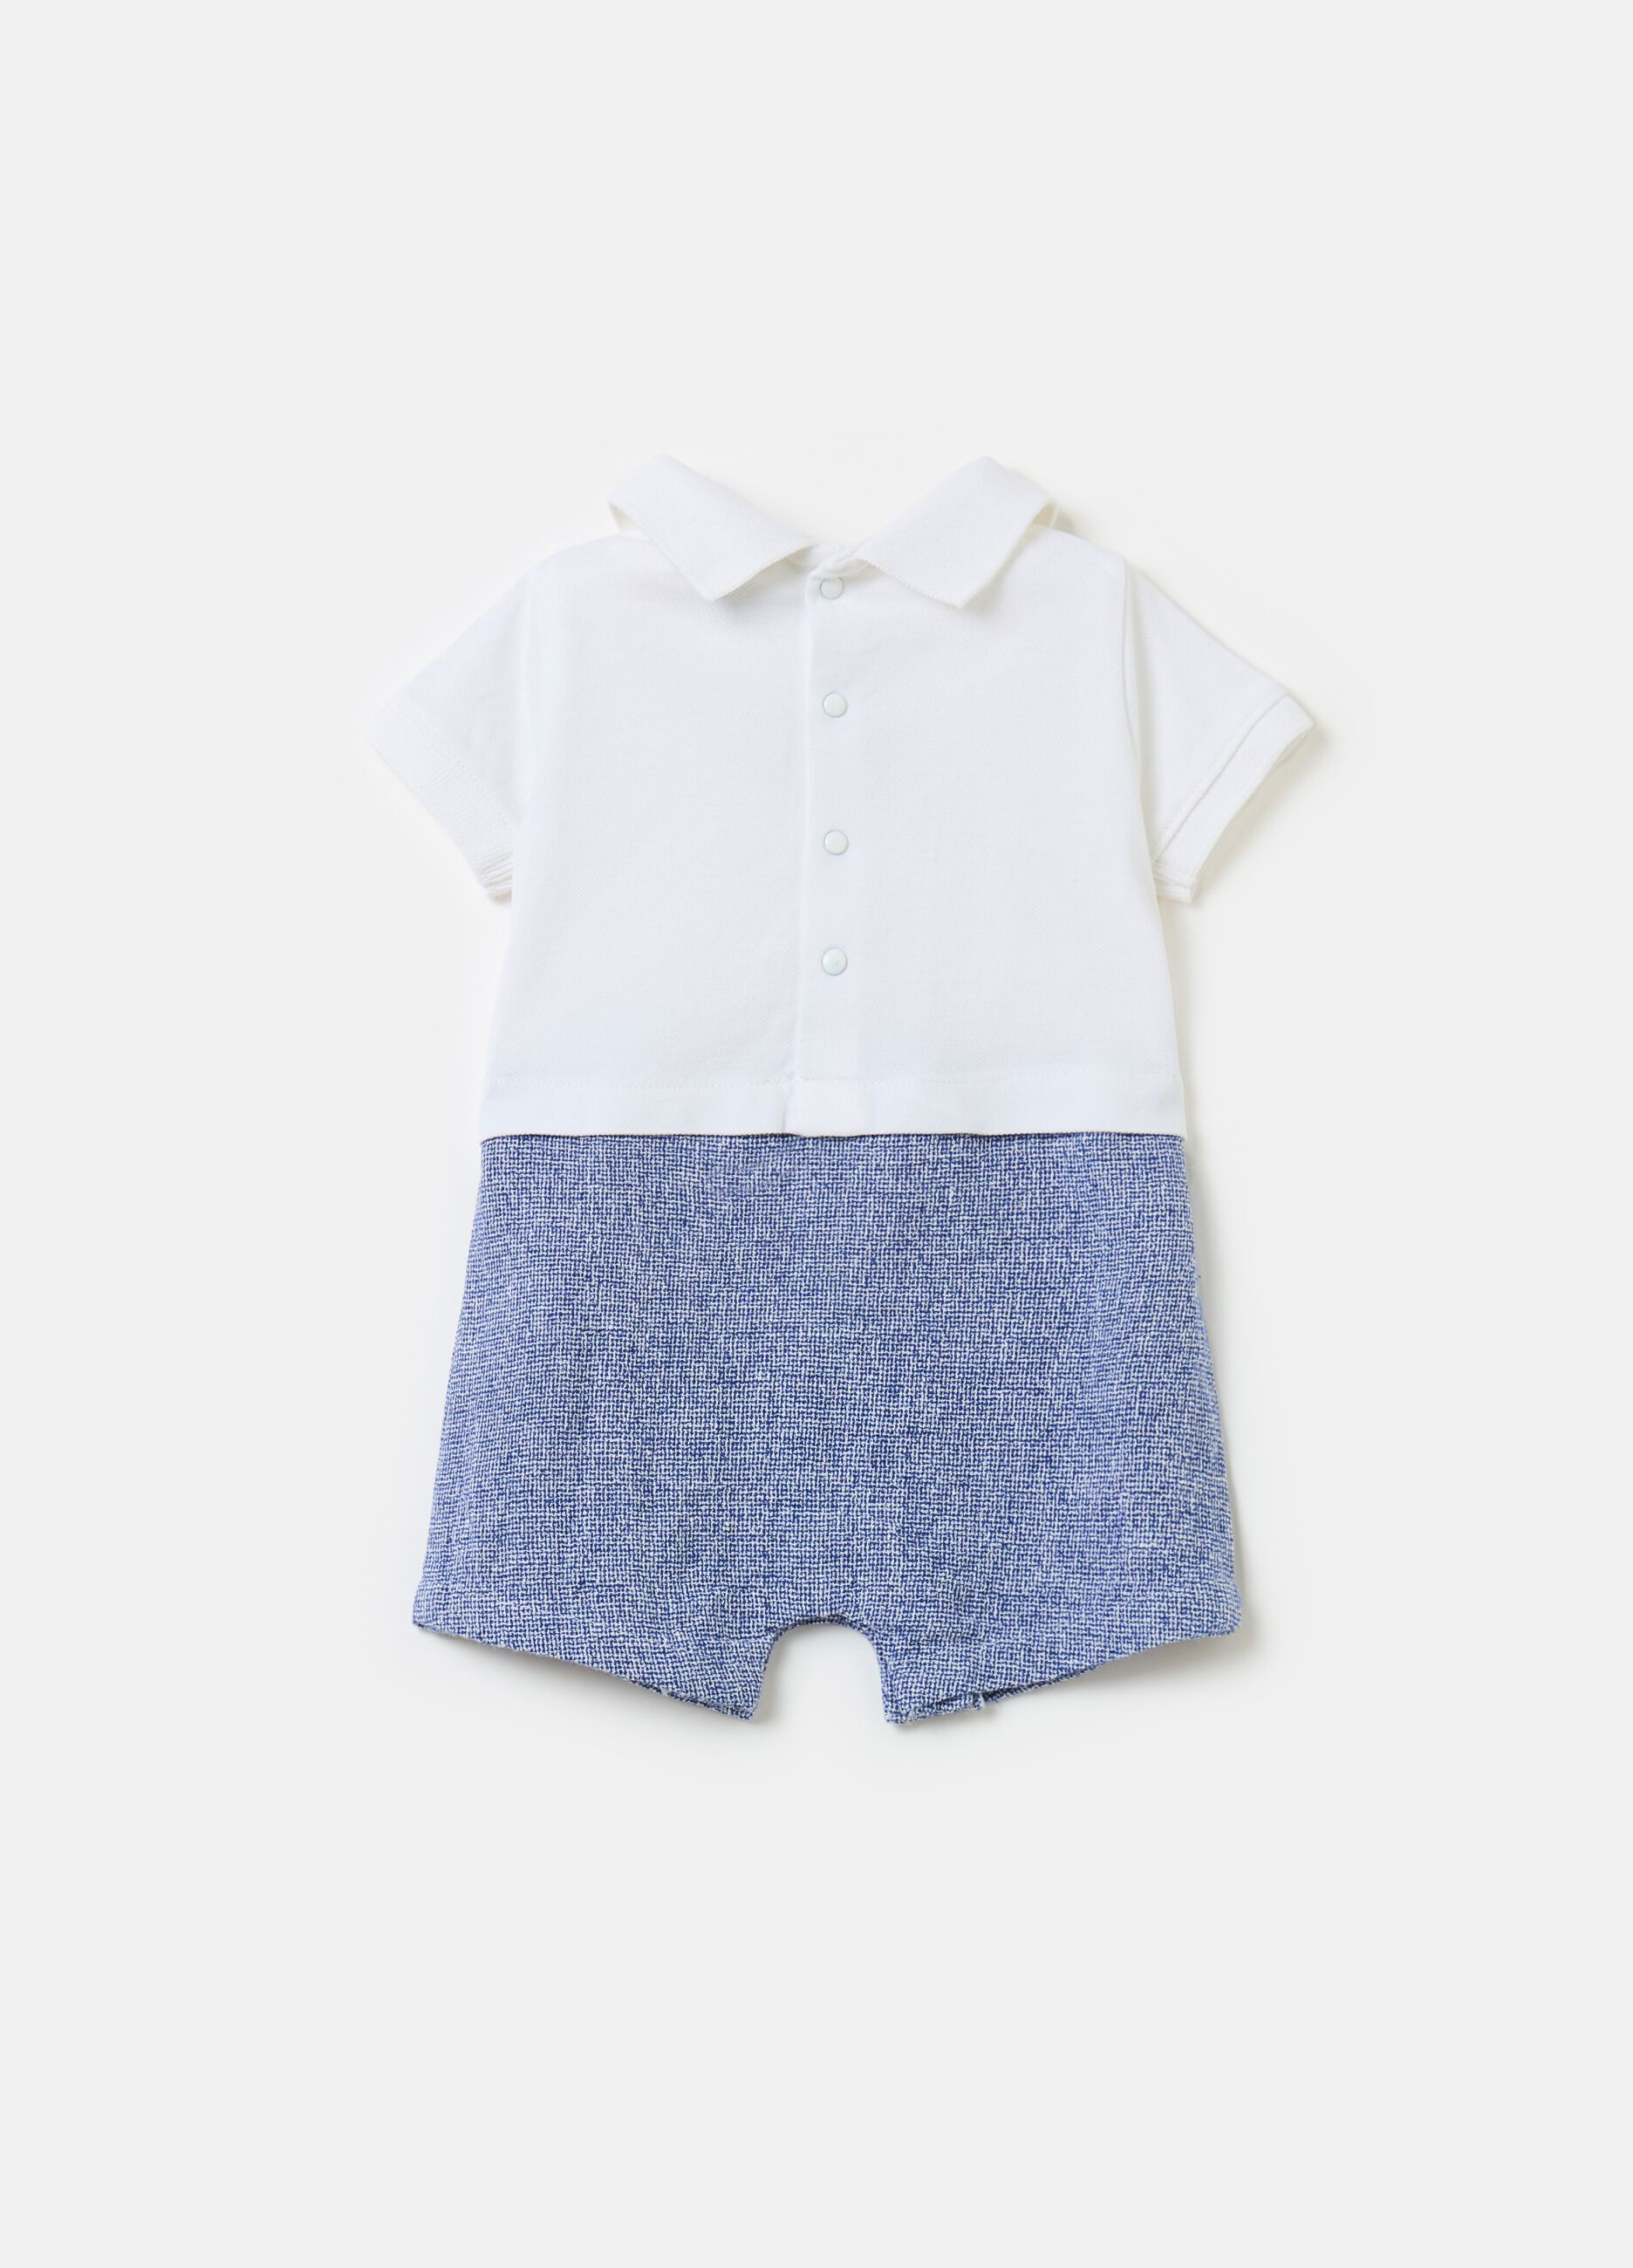 Cotton and linen romper suit with embroidery